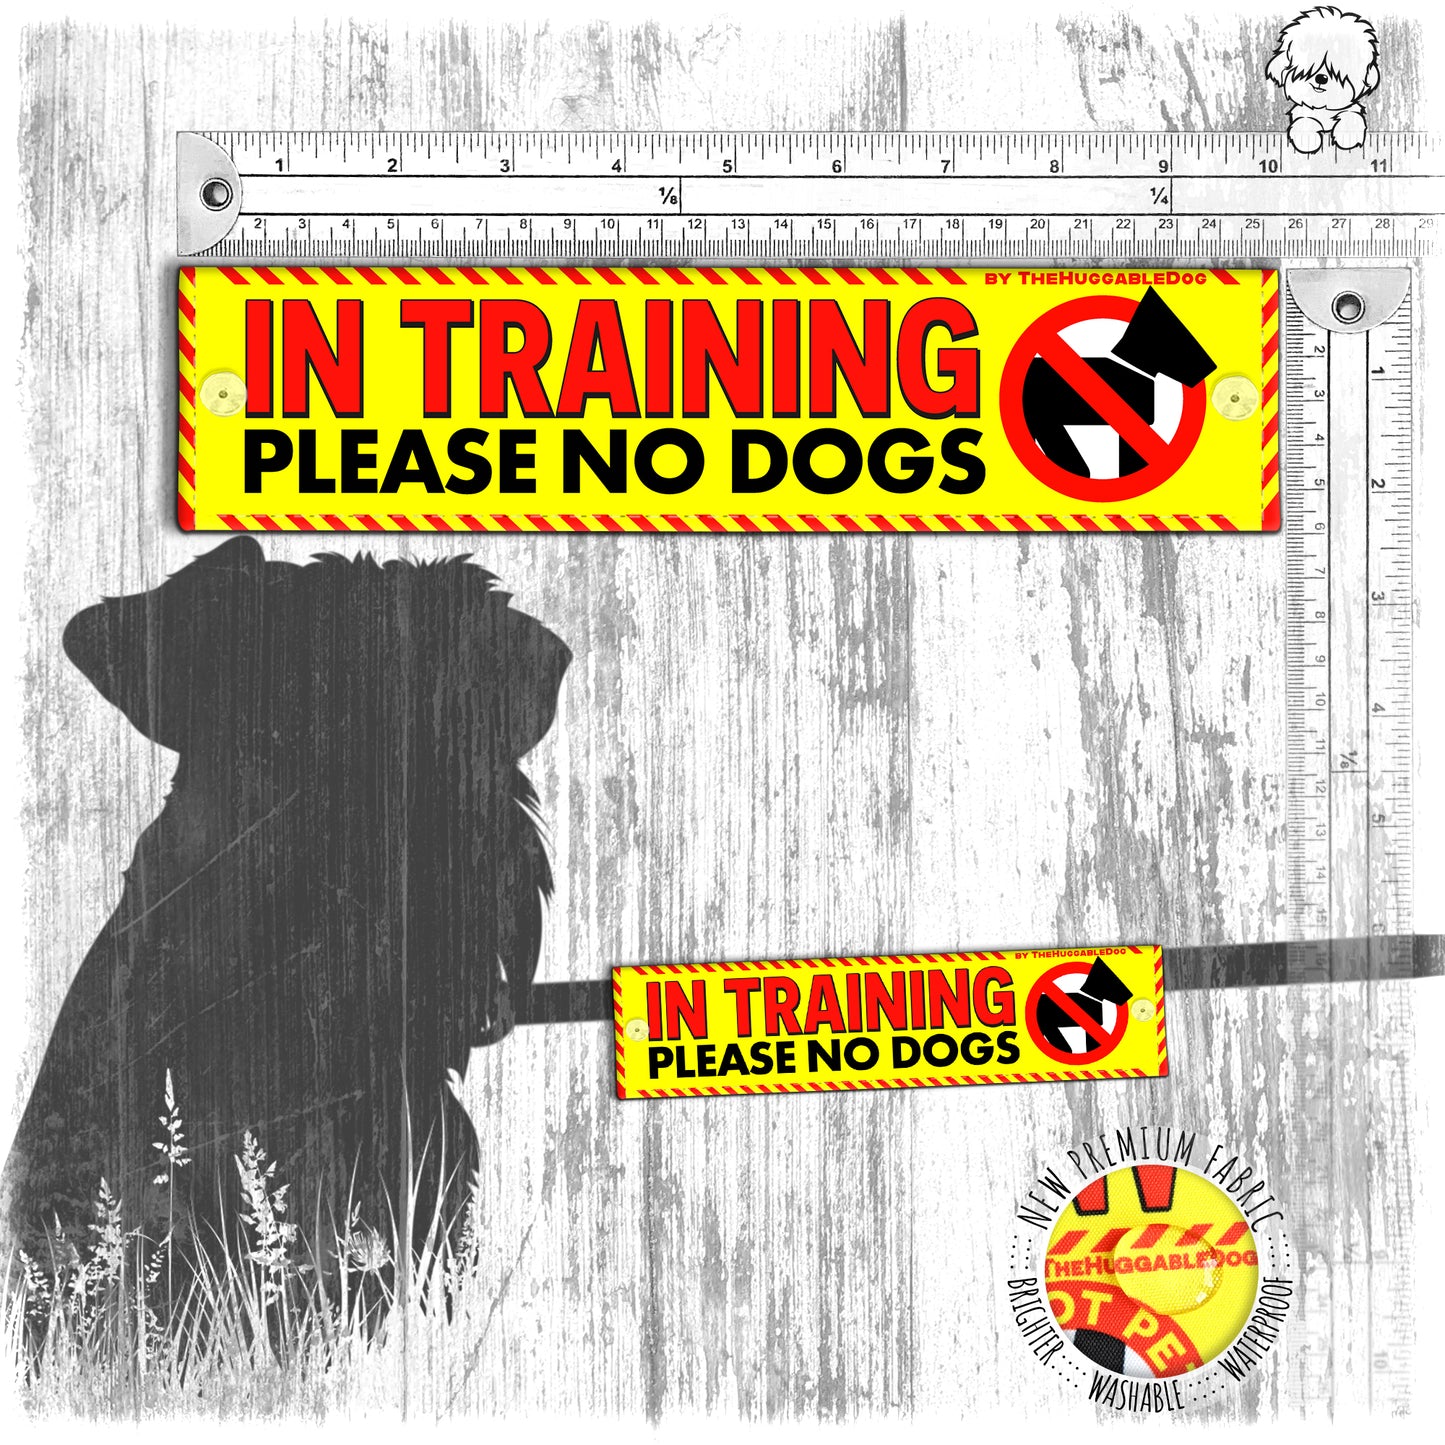 "In TRAINING, please no dogs". Leash sleeves for dogs.